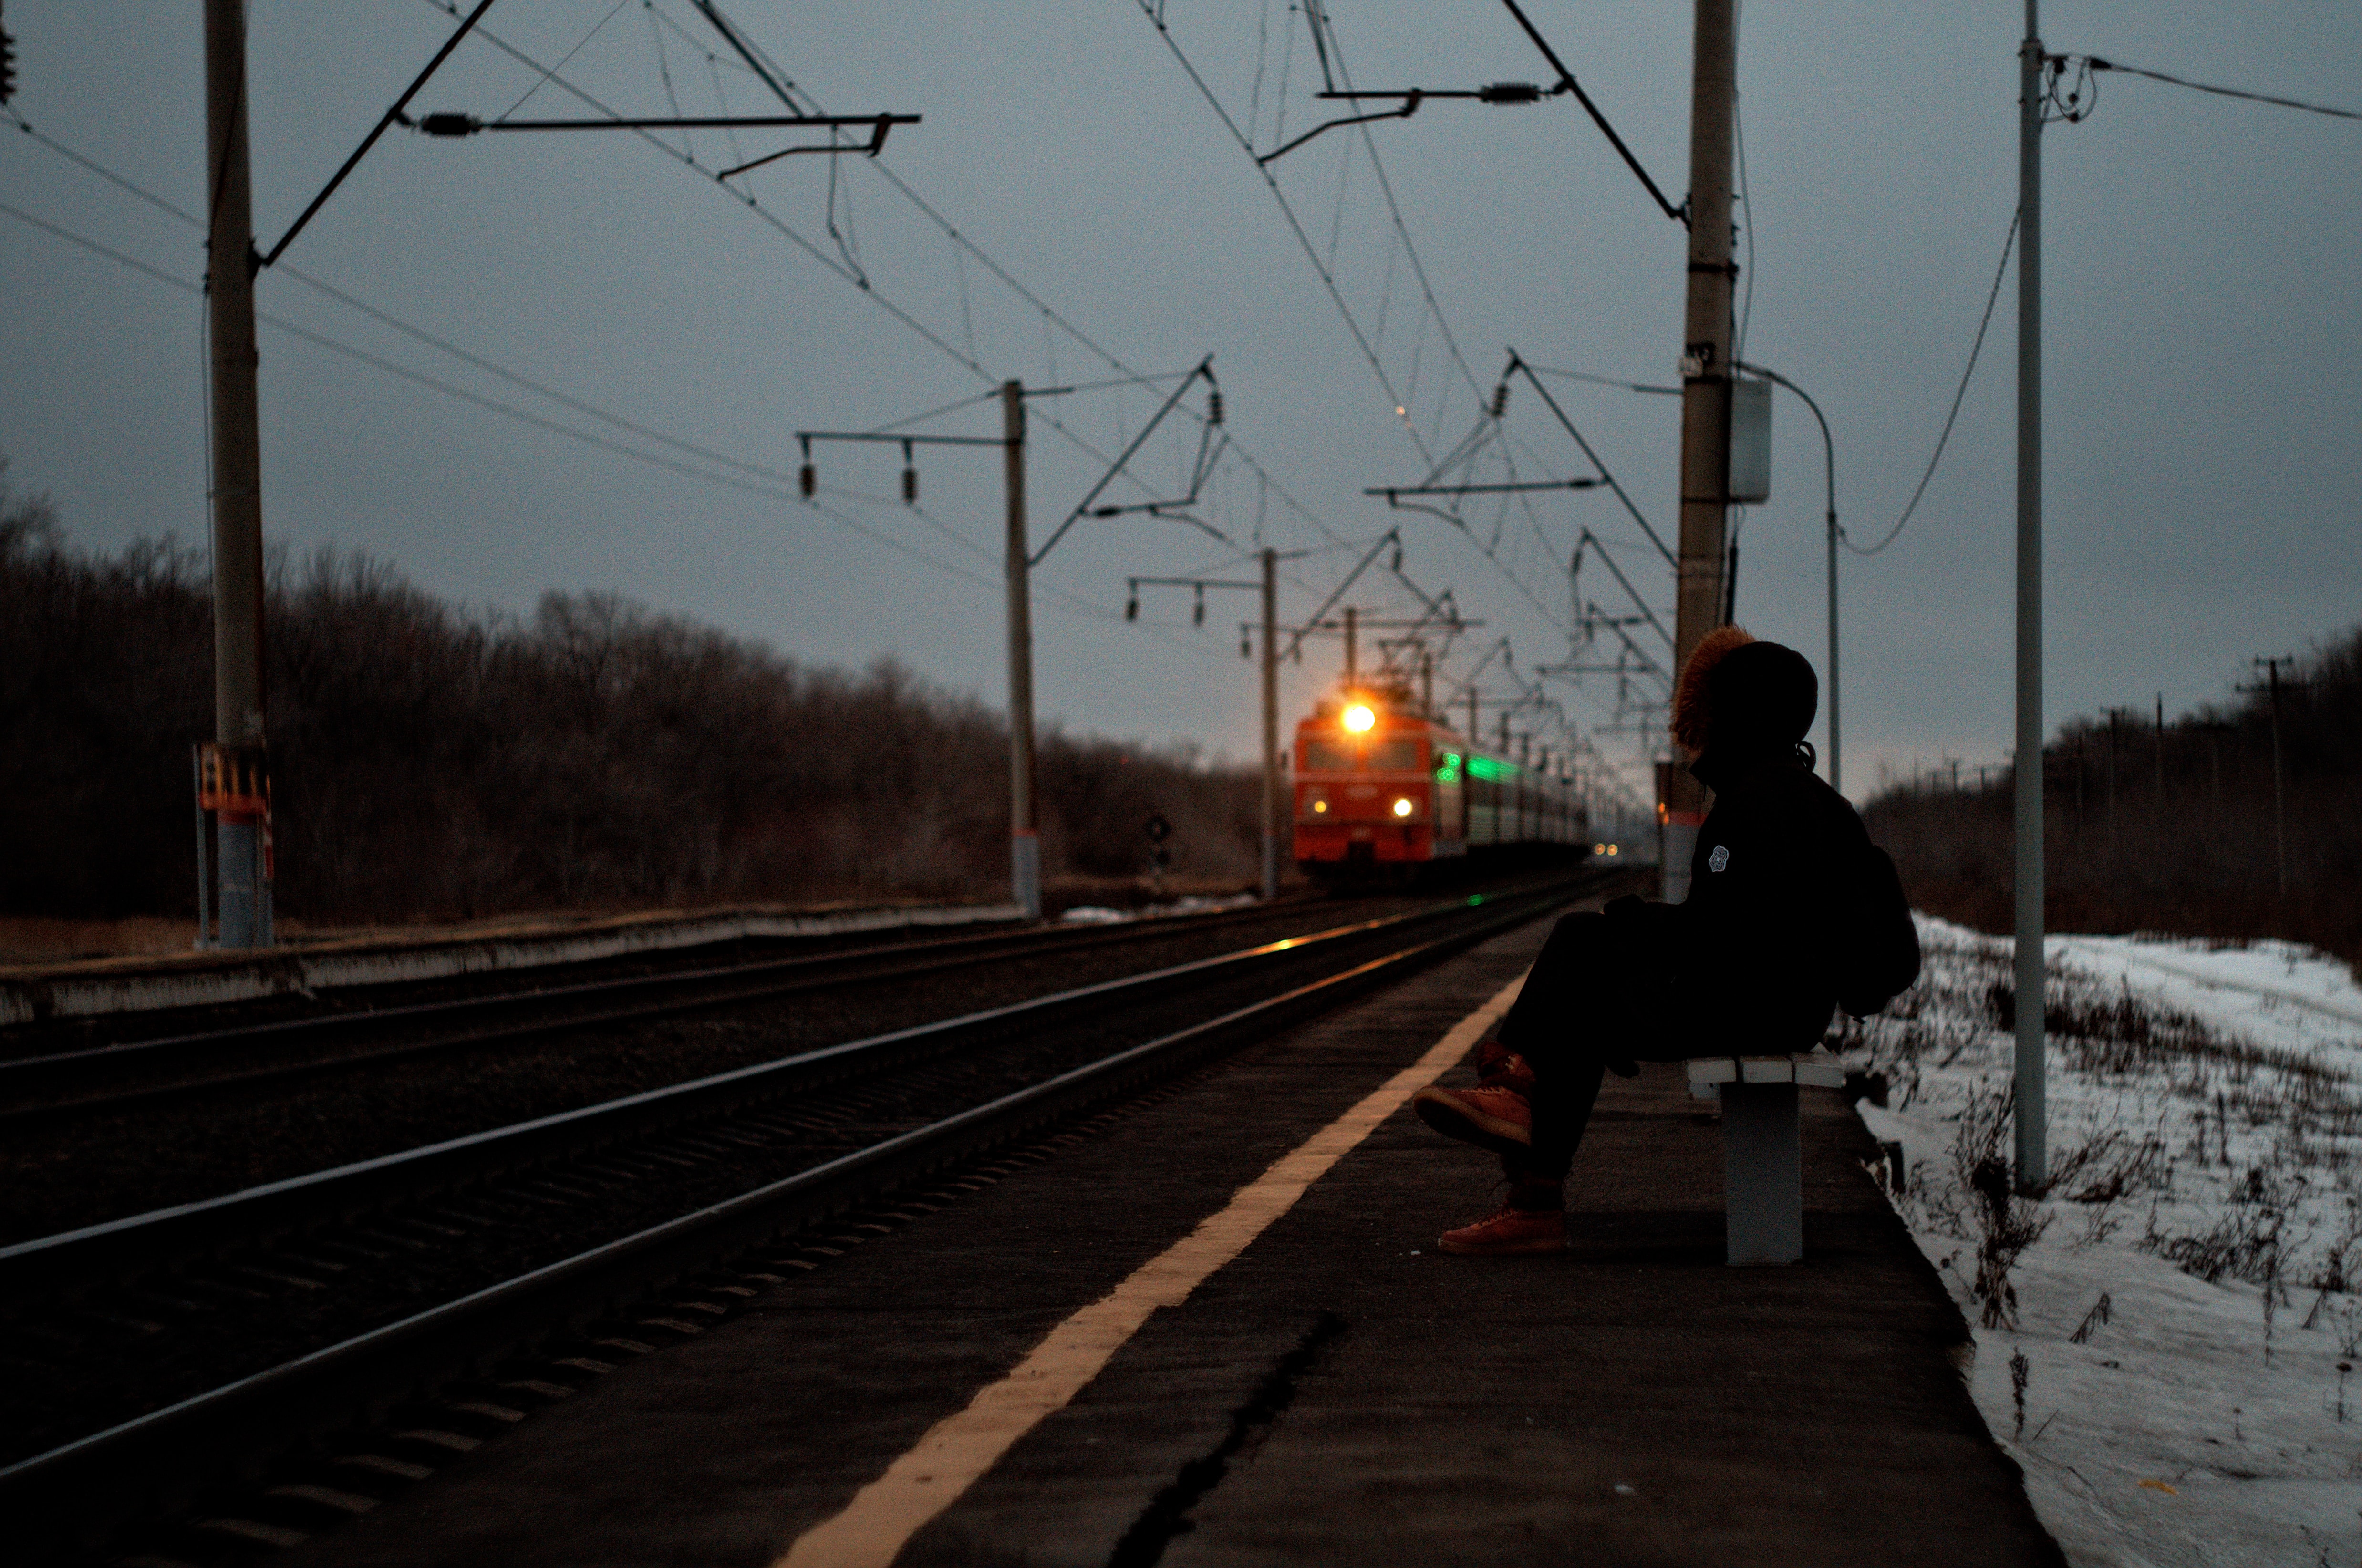 sorrow, loneliness, silhouette, train Lock Screen Images